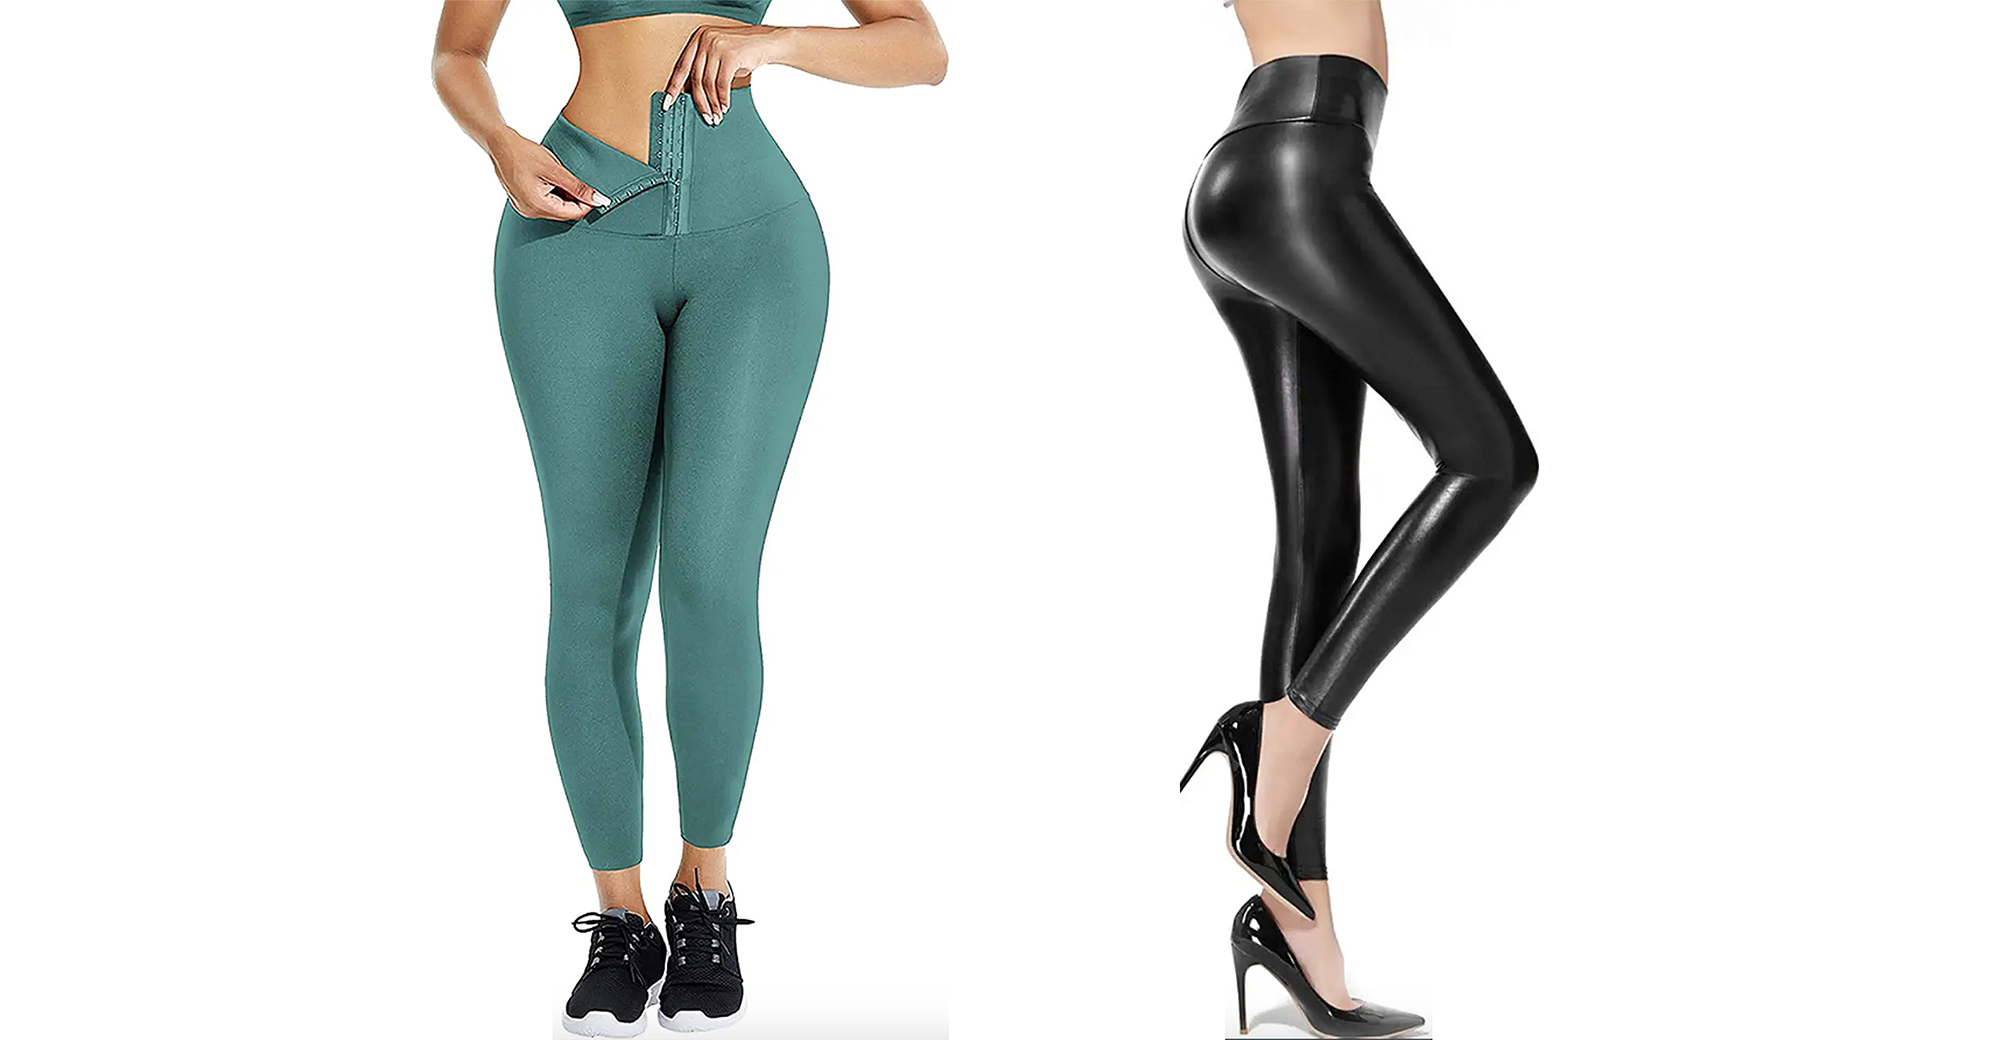 High Waisted Legging-Tummy Control Non-See Through Workout Leggings Miss Adola Women's High Waisted Yoga Pants with Pockets 